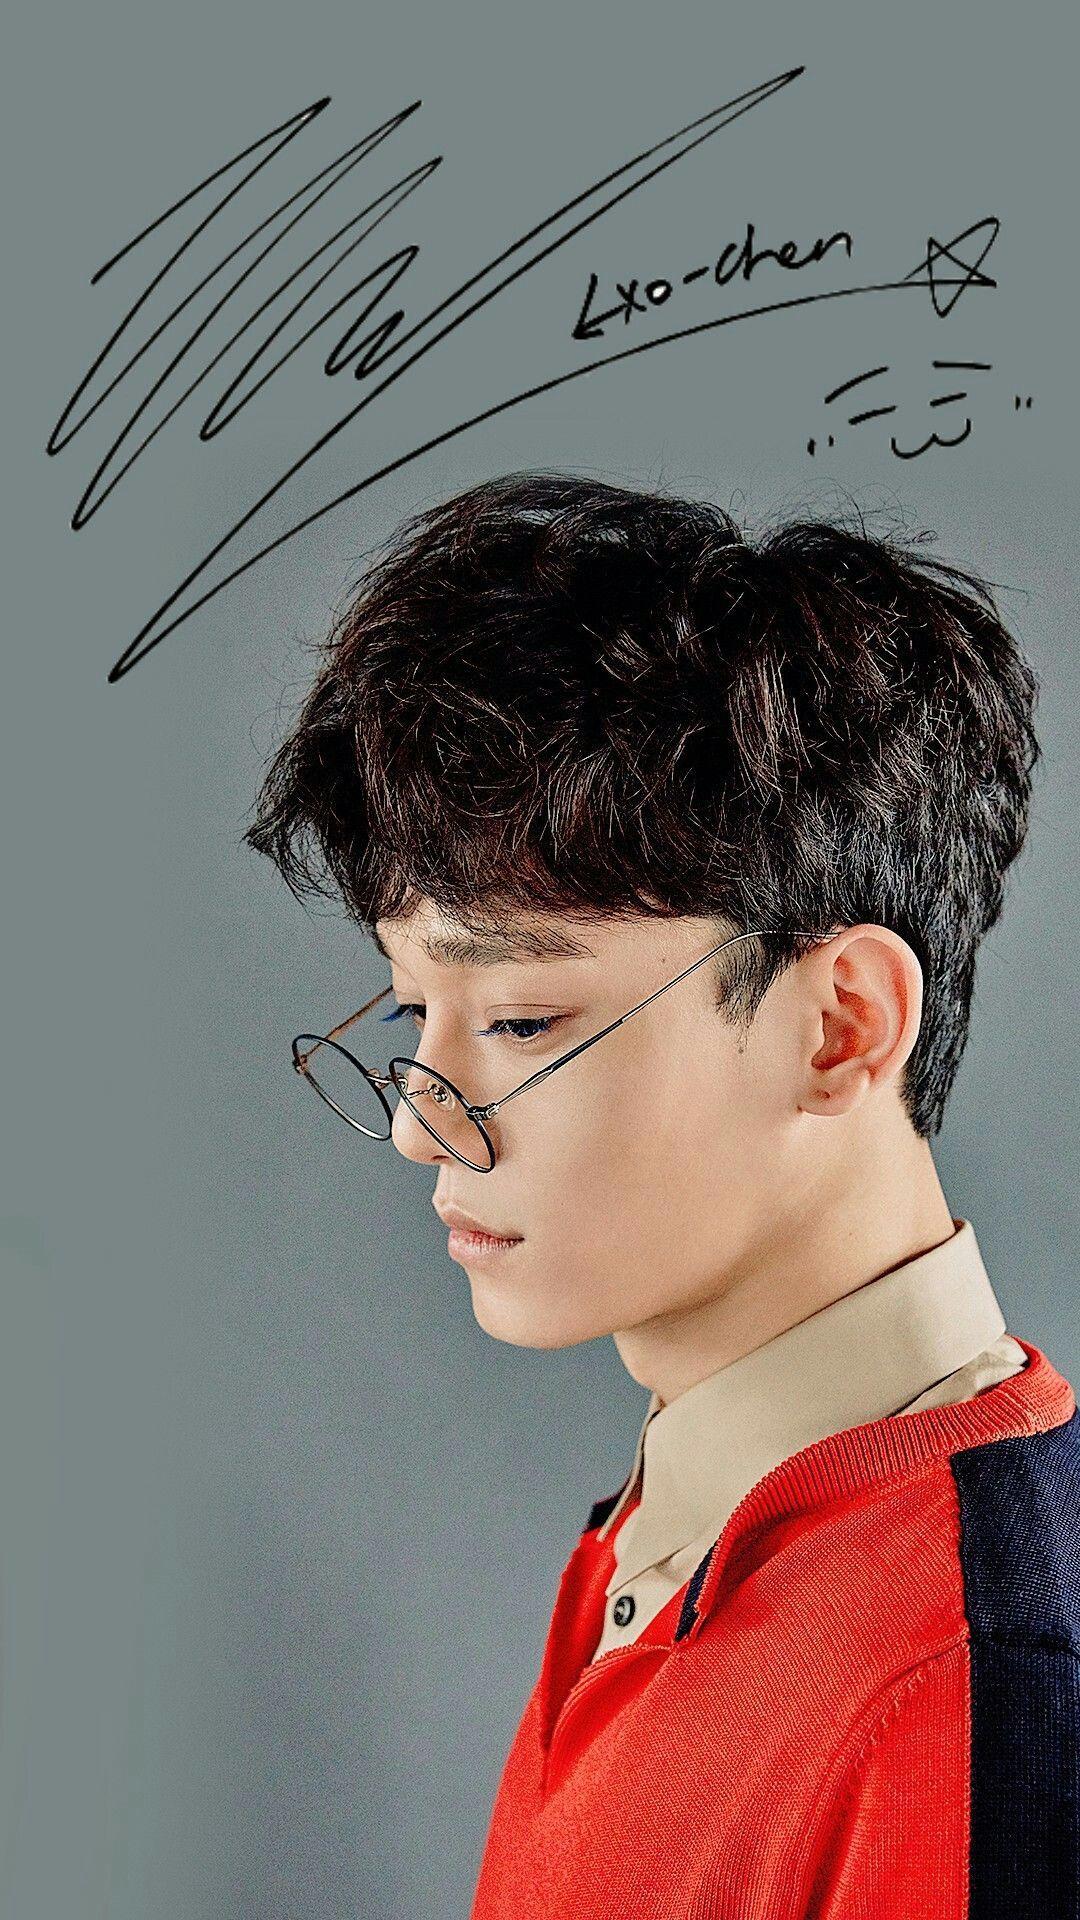 Chen (EXO) Profile and Facts; Chen’s Ideal Type (Updated!)